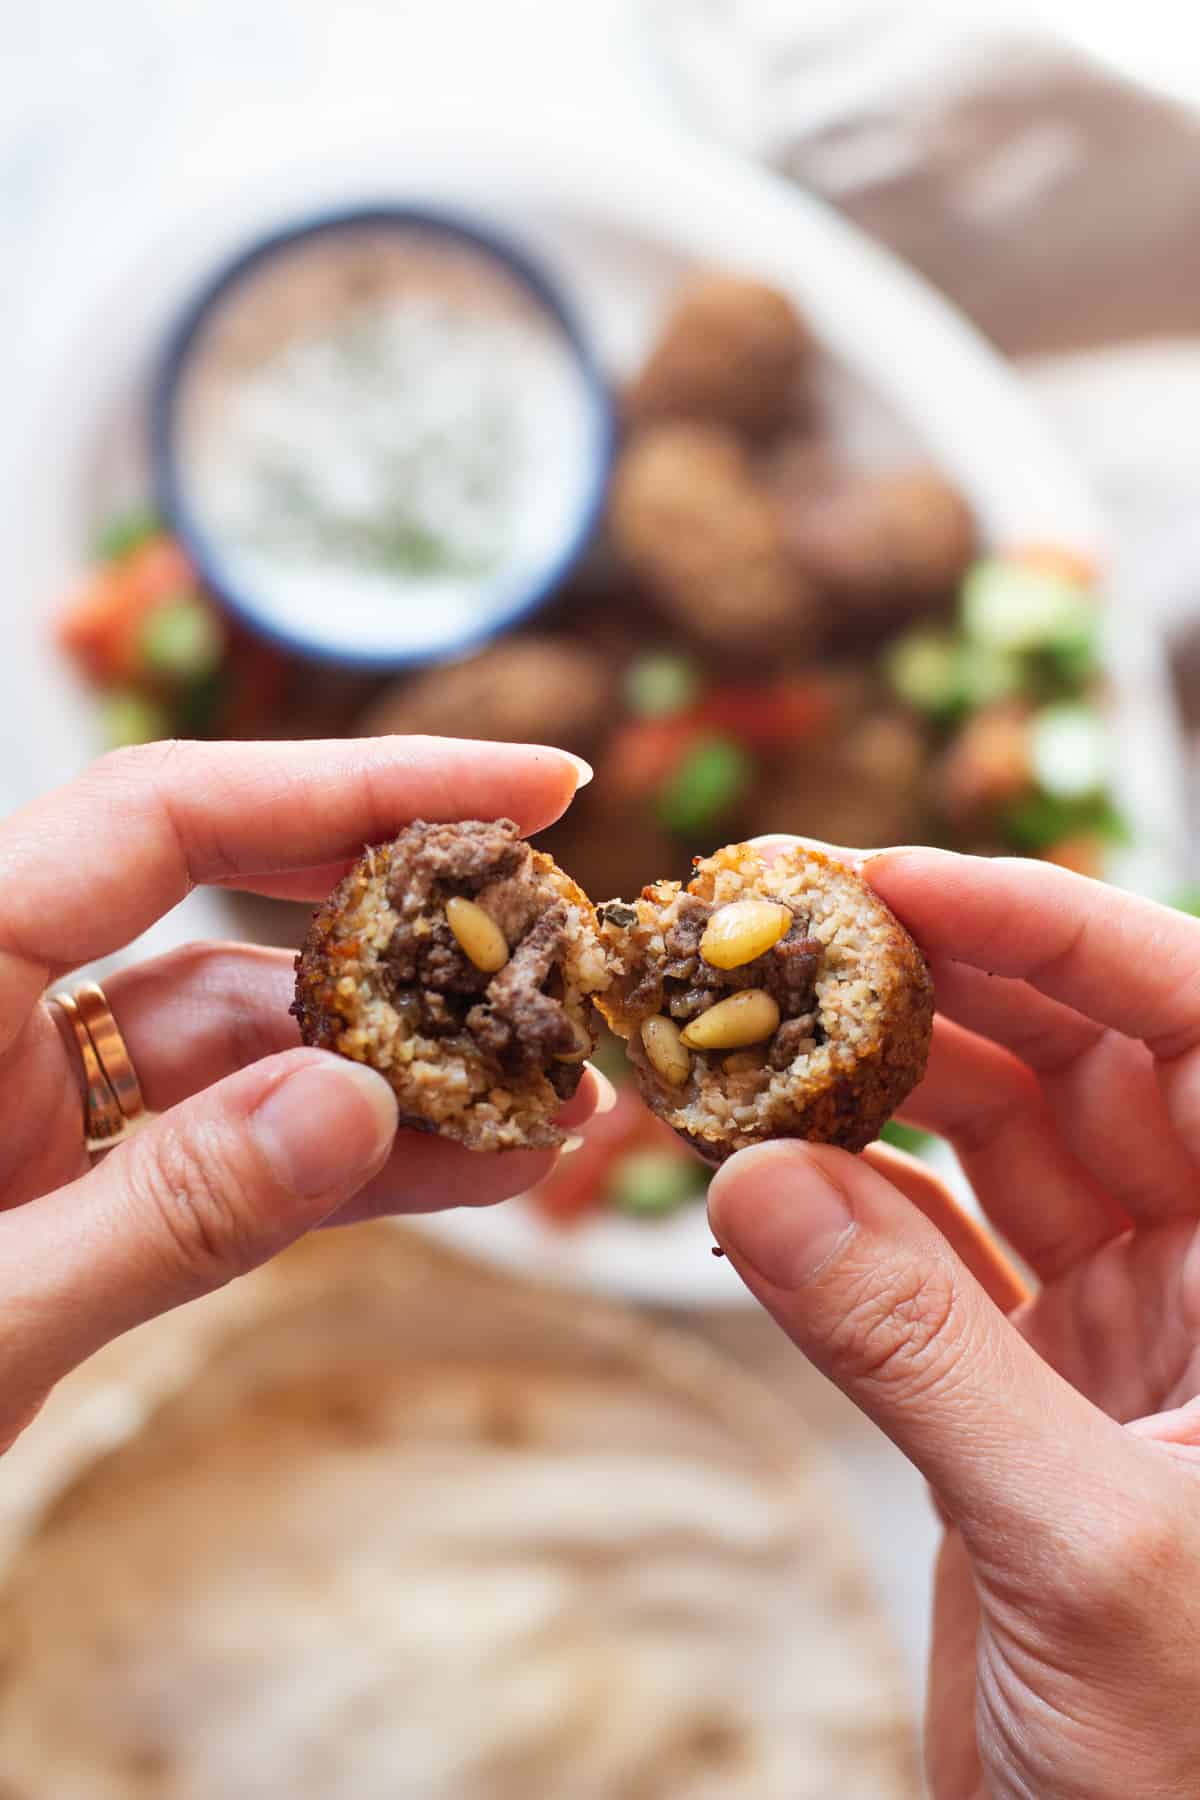 Inside of a fried kibbeh with ground beef, spices and pine nuts. 